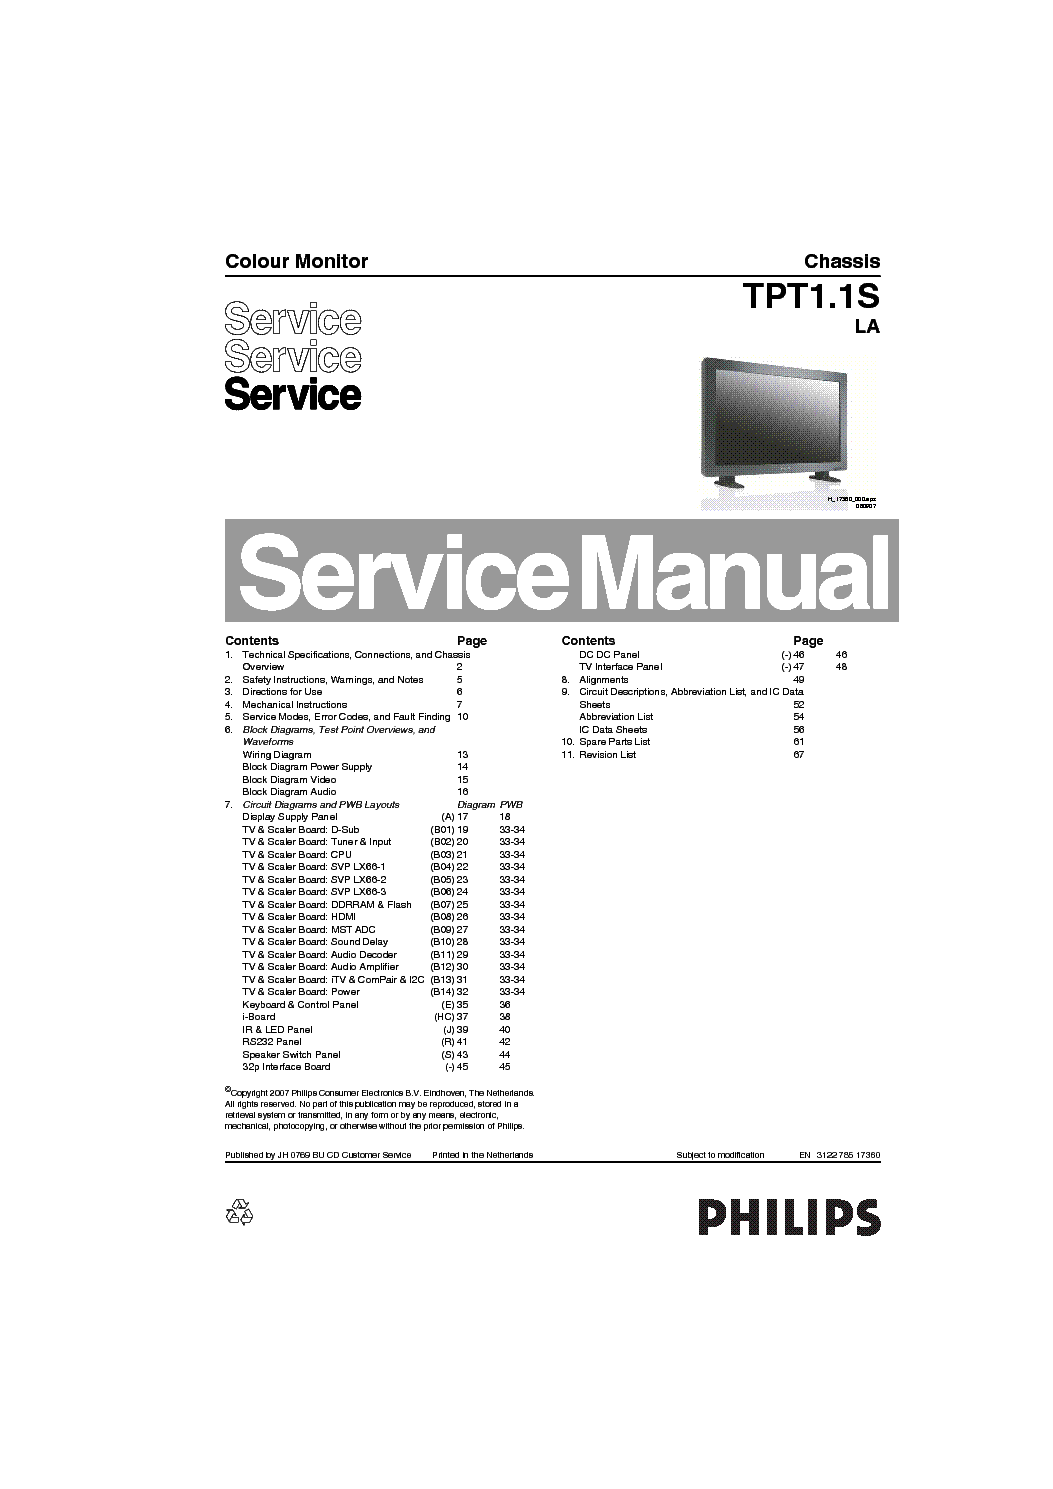 PHILIPS BDL3231-4231 CHASSIS TPT1.1S-LA service manual (1st page)